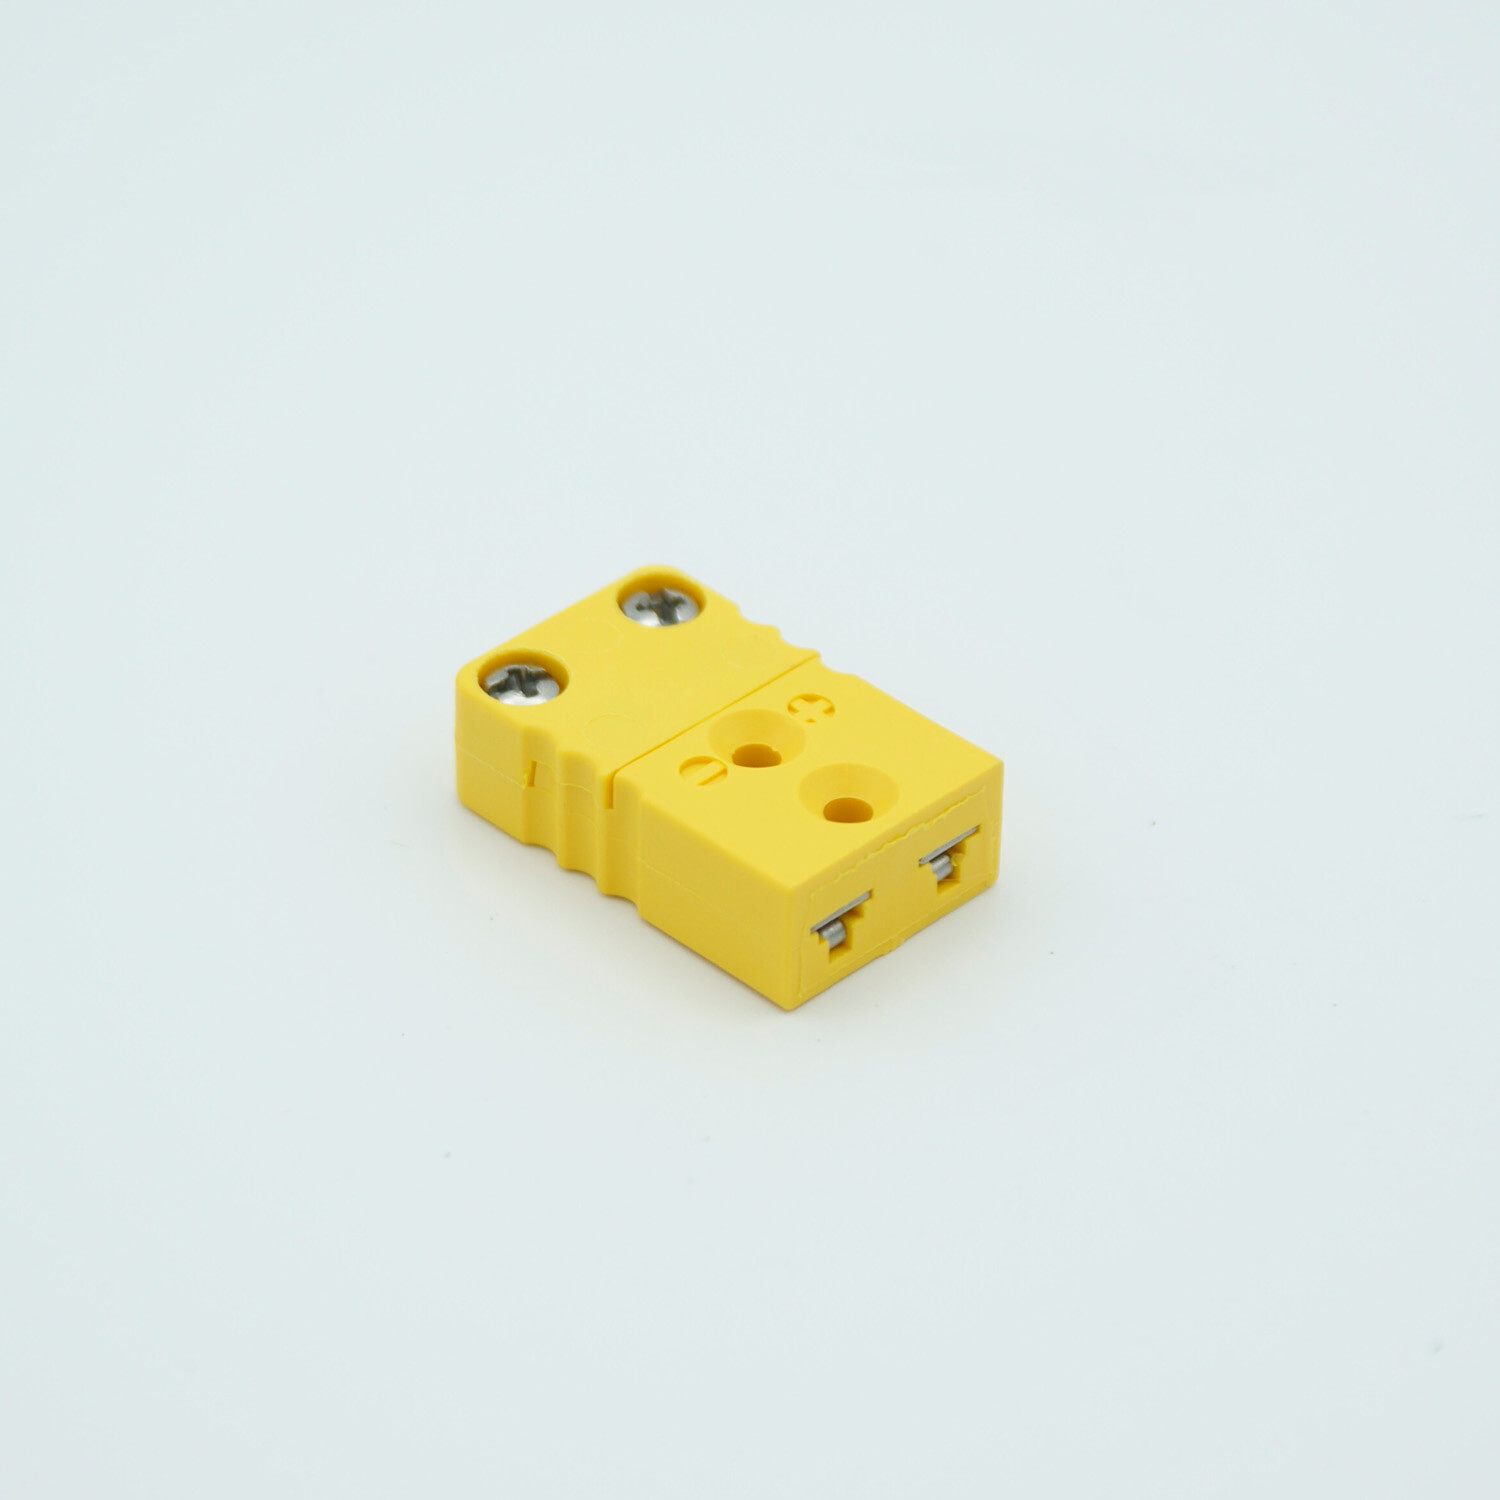 Type K Thermocouple Connector Adapter